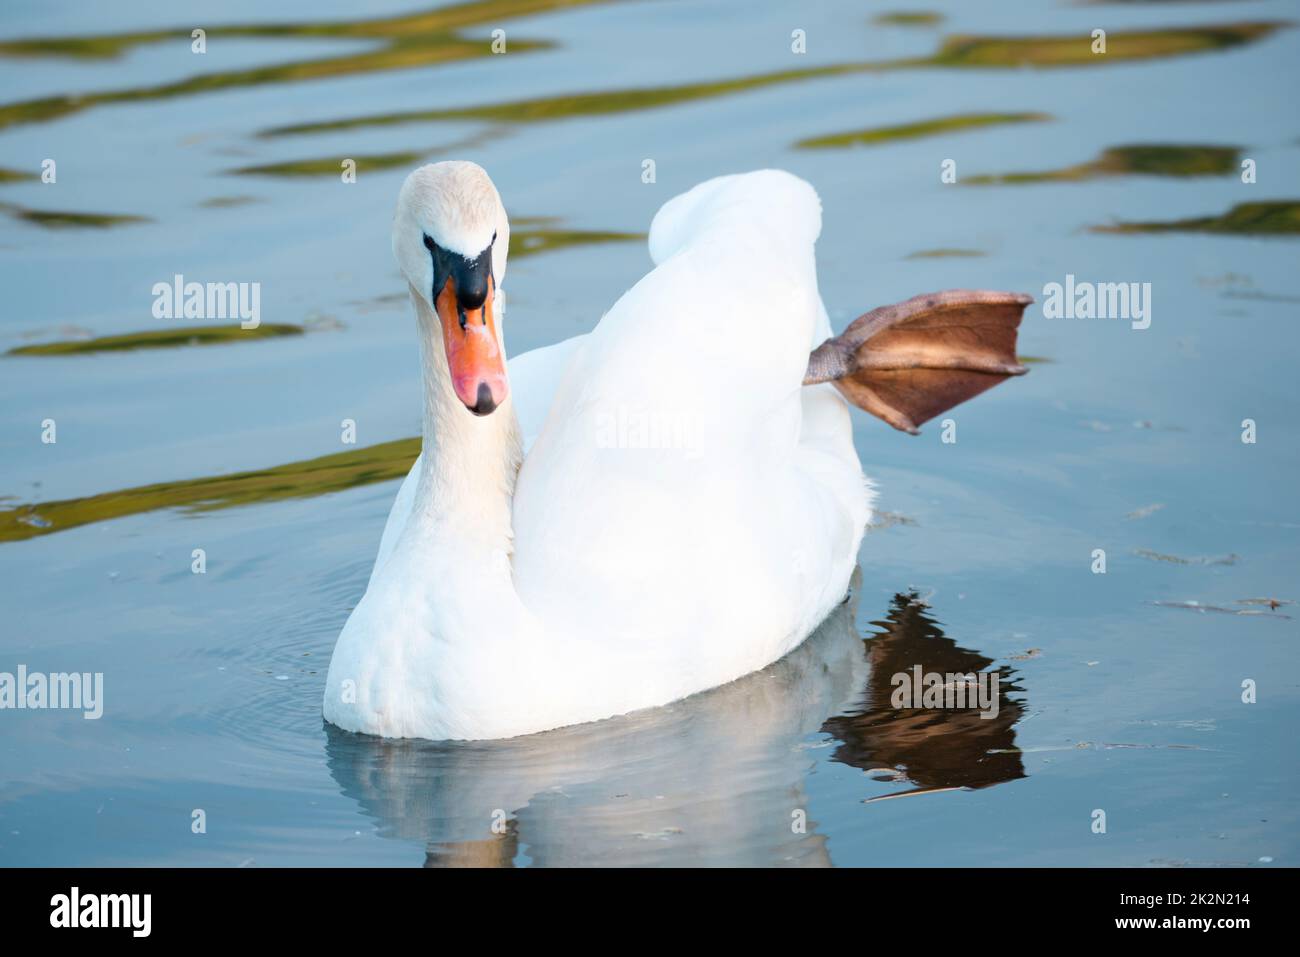 White swan flapping the wings, Moselle river in Germany, water birds, wildlife Stock Photo